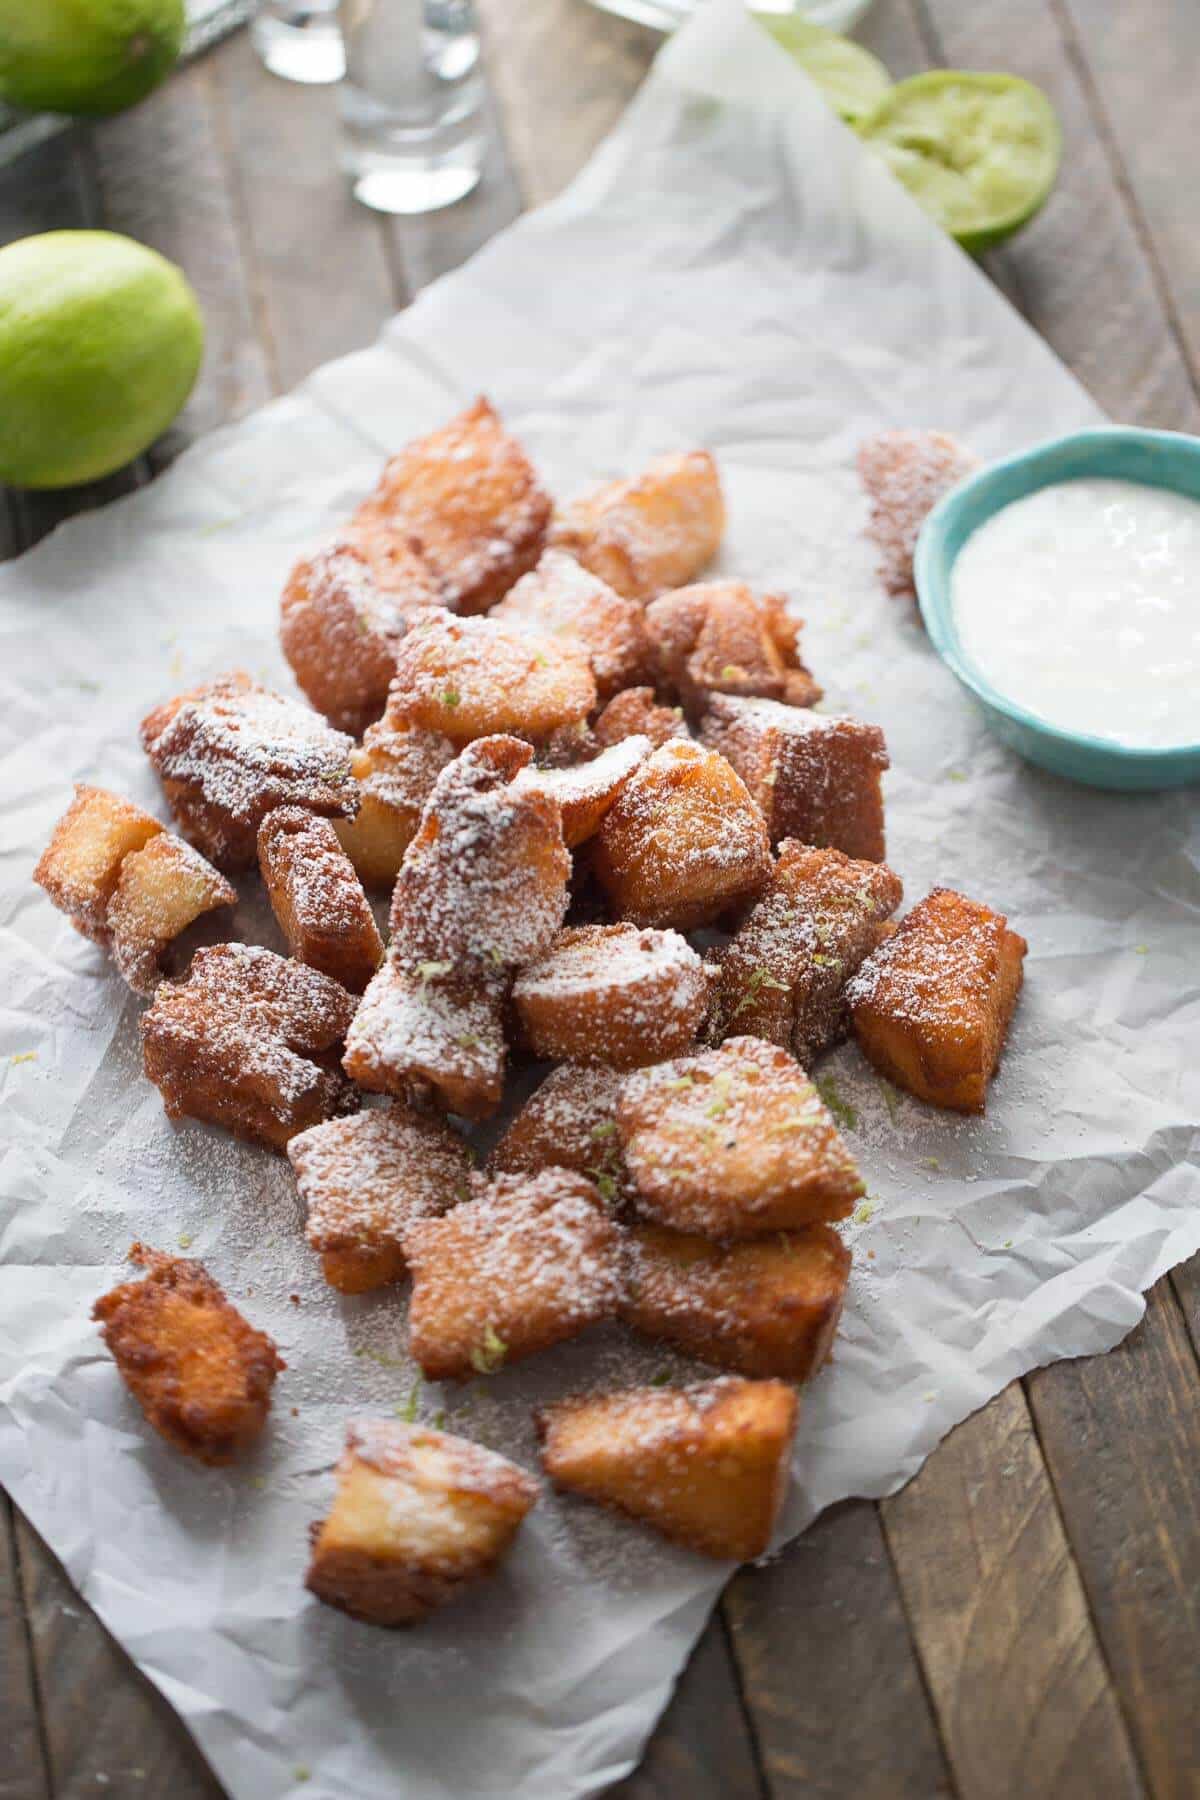 Tequila shots serve as dessert ! Angel food cake is dipped in tequila and fried just until golden!